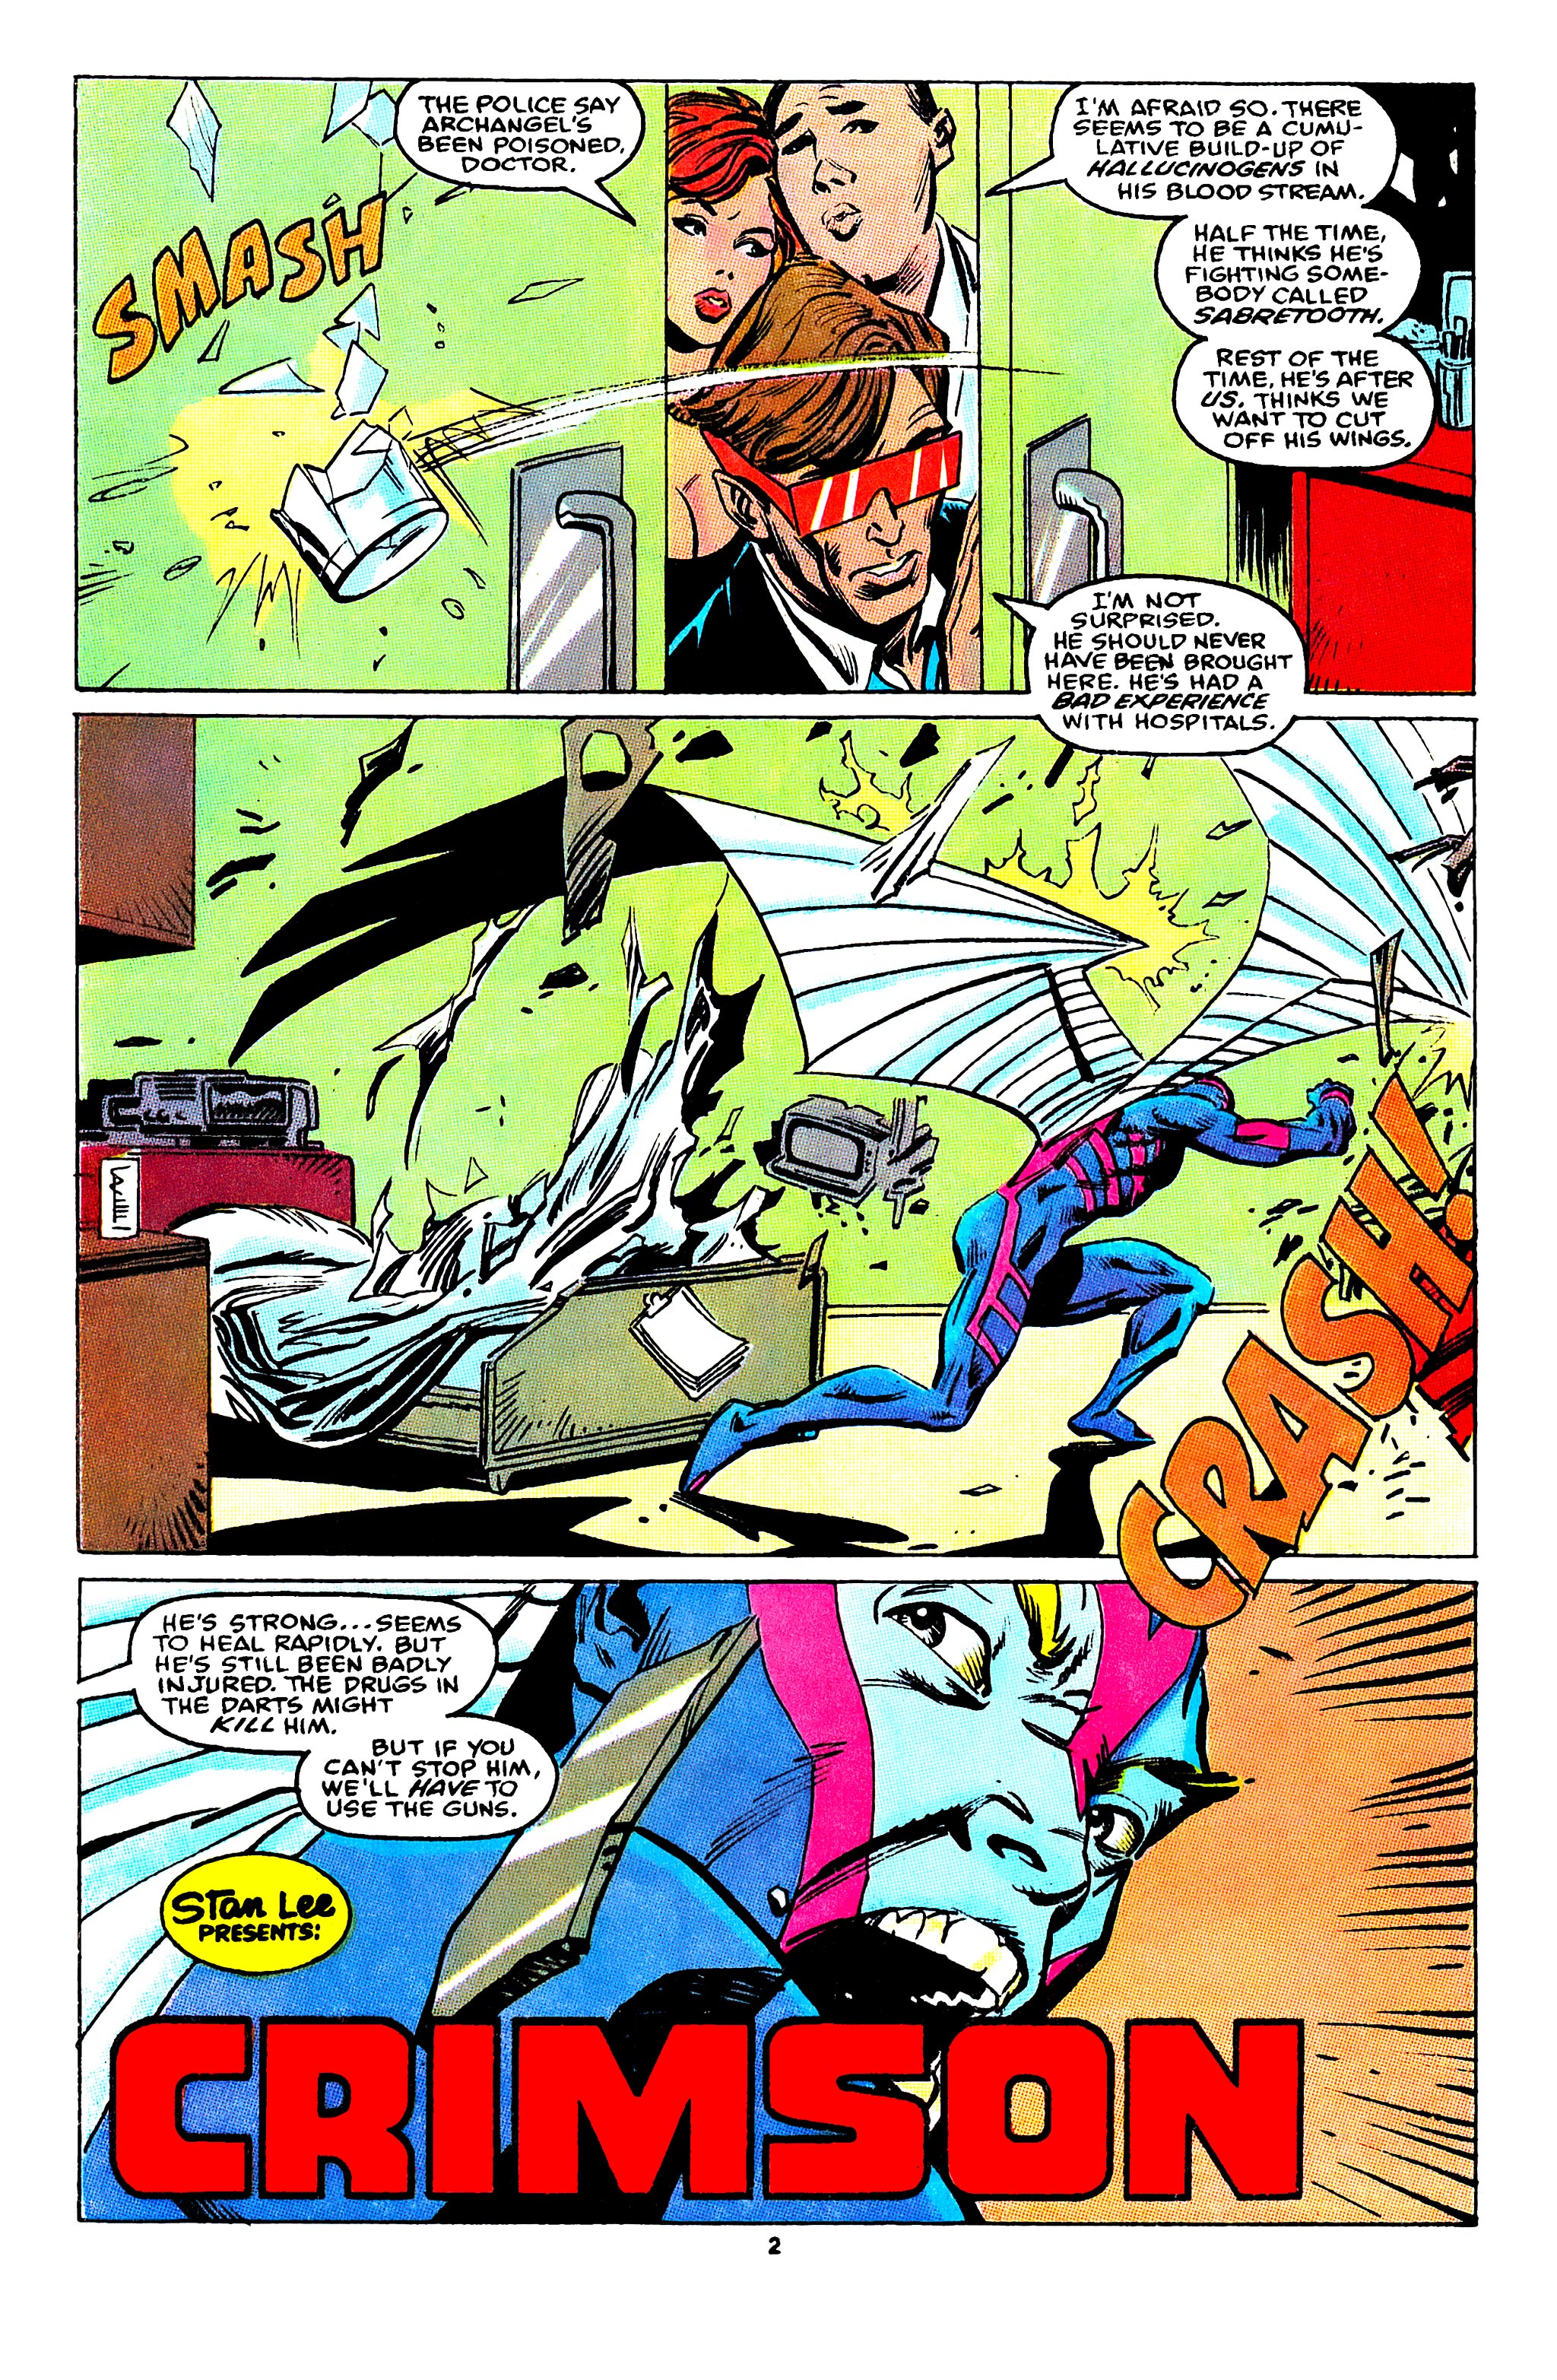 X-Factor (1986) 54 Page 2